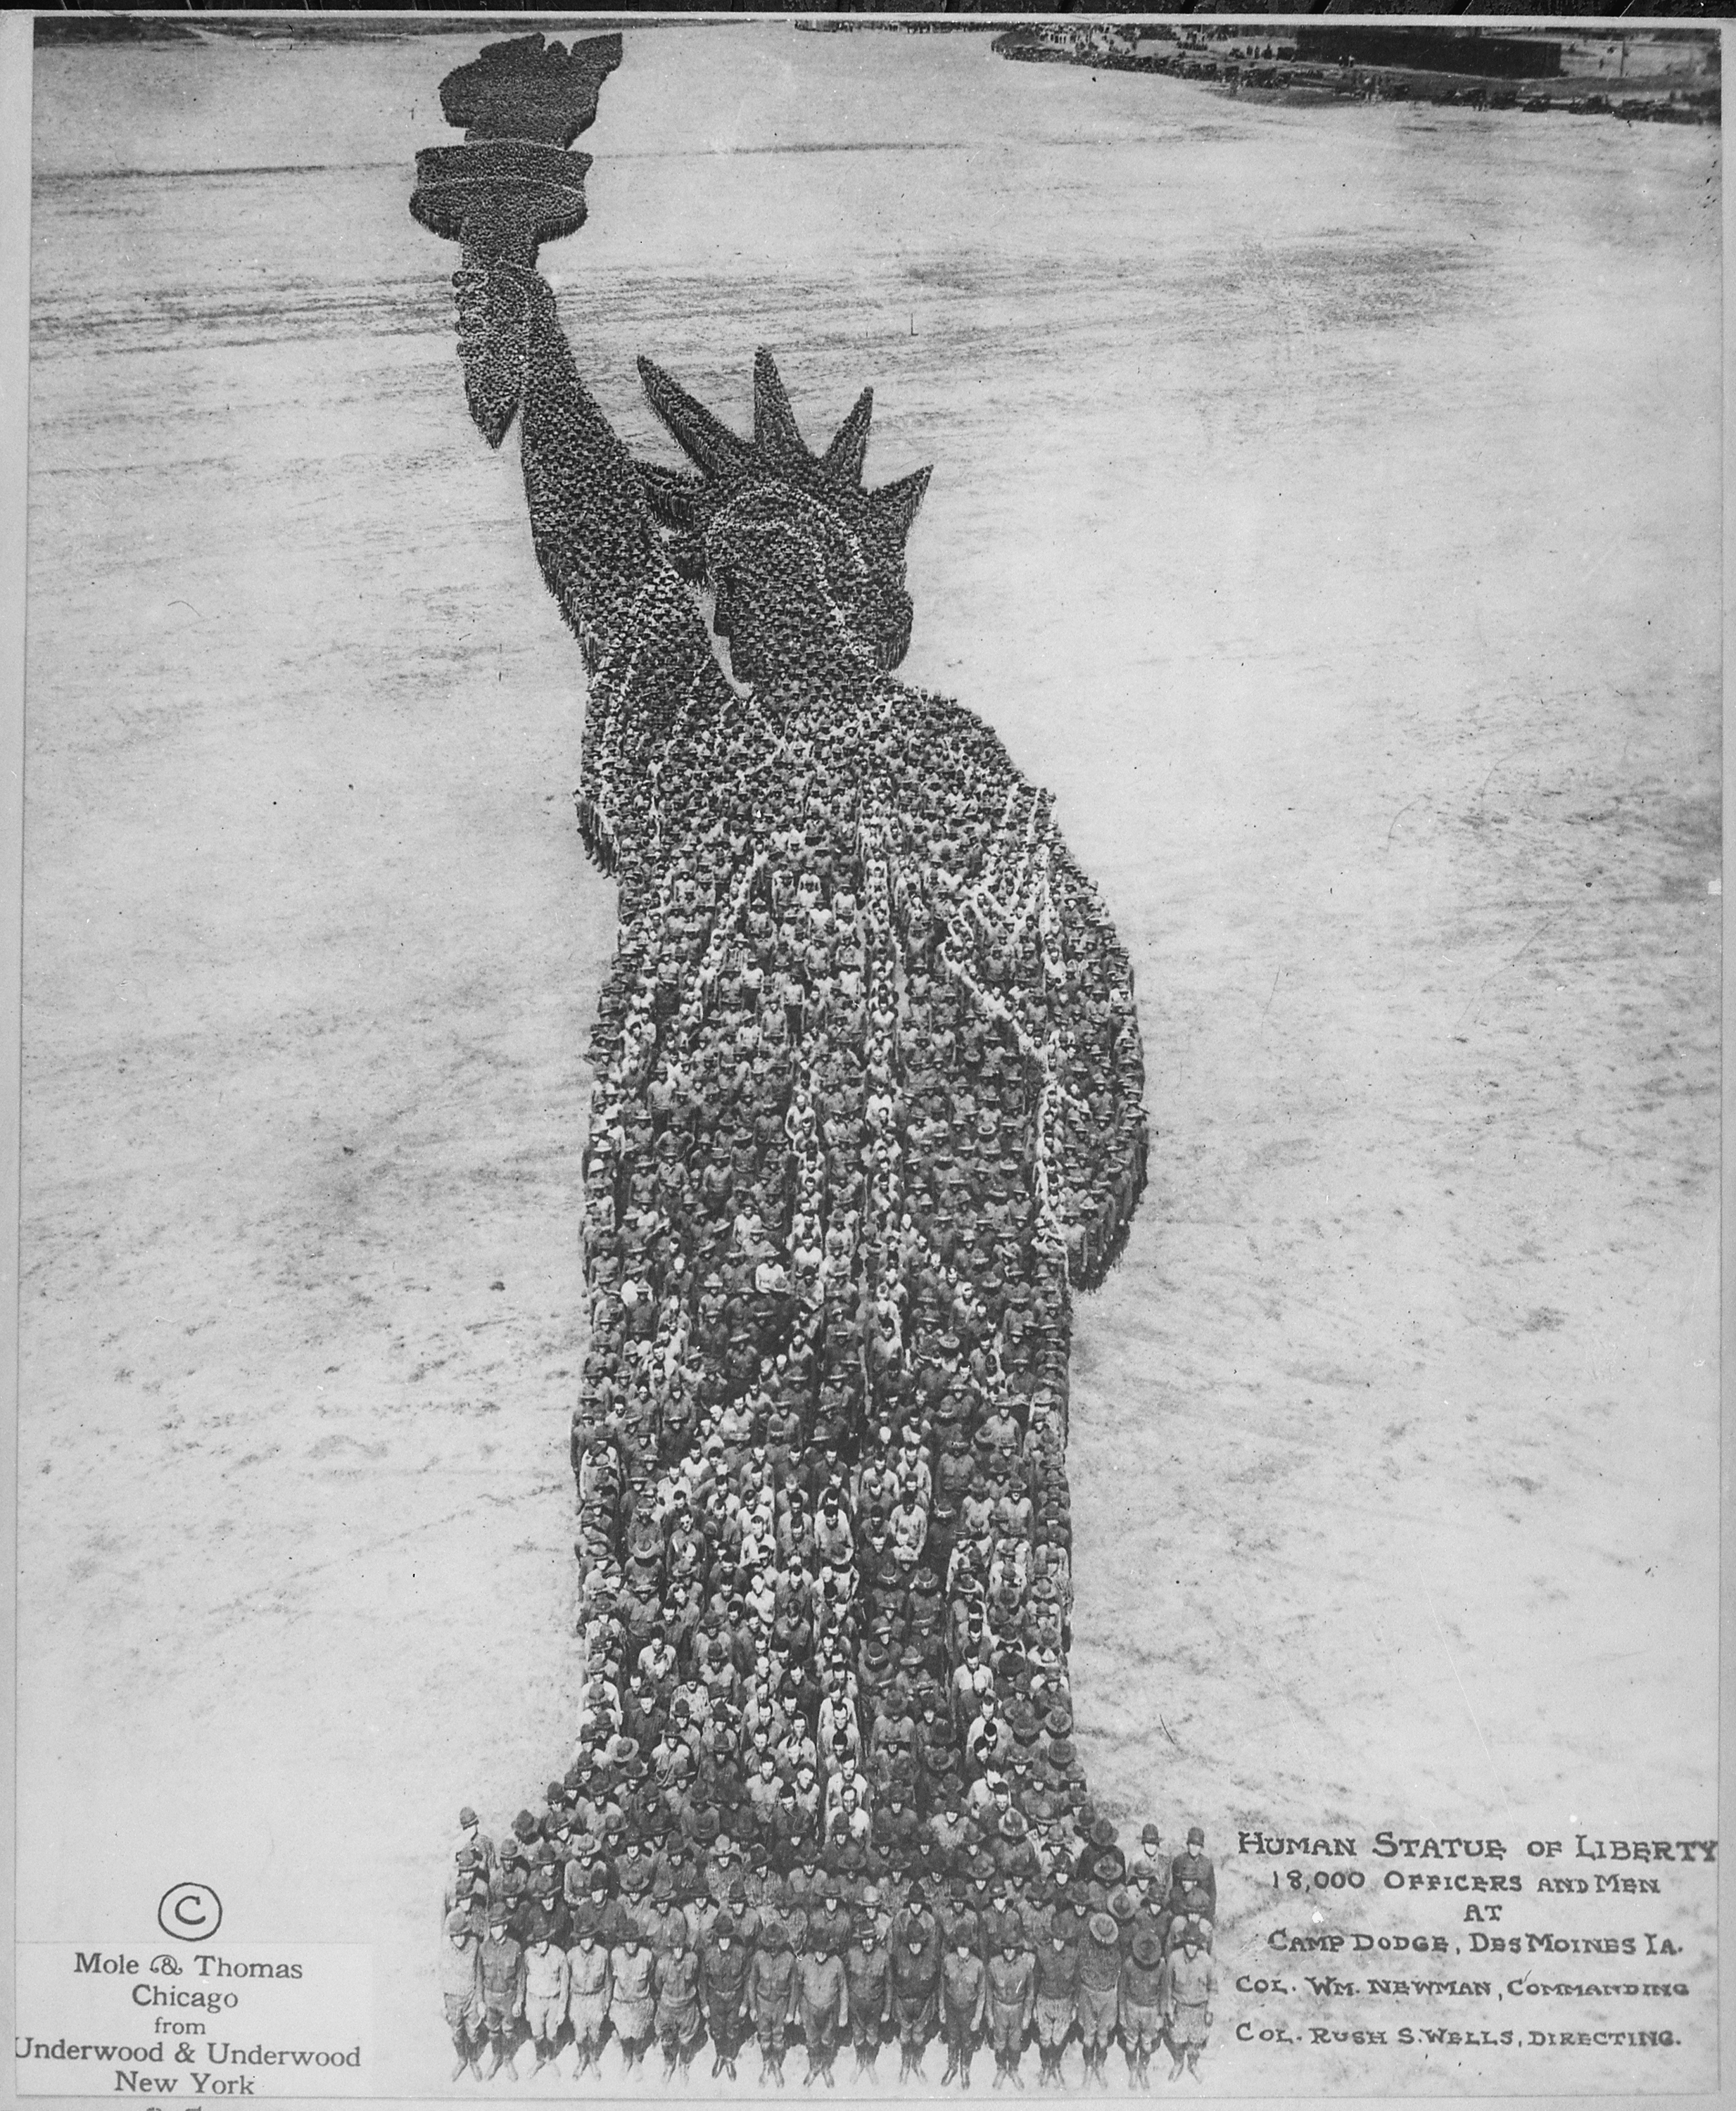 Human Statue of Liberty. 18,000 Officers and Men at Camp Dodge, Des Moines, Iowa. Colonel William Newman,